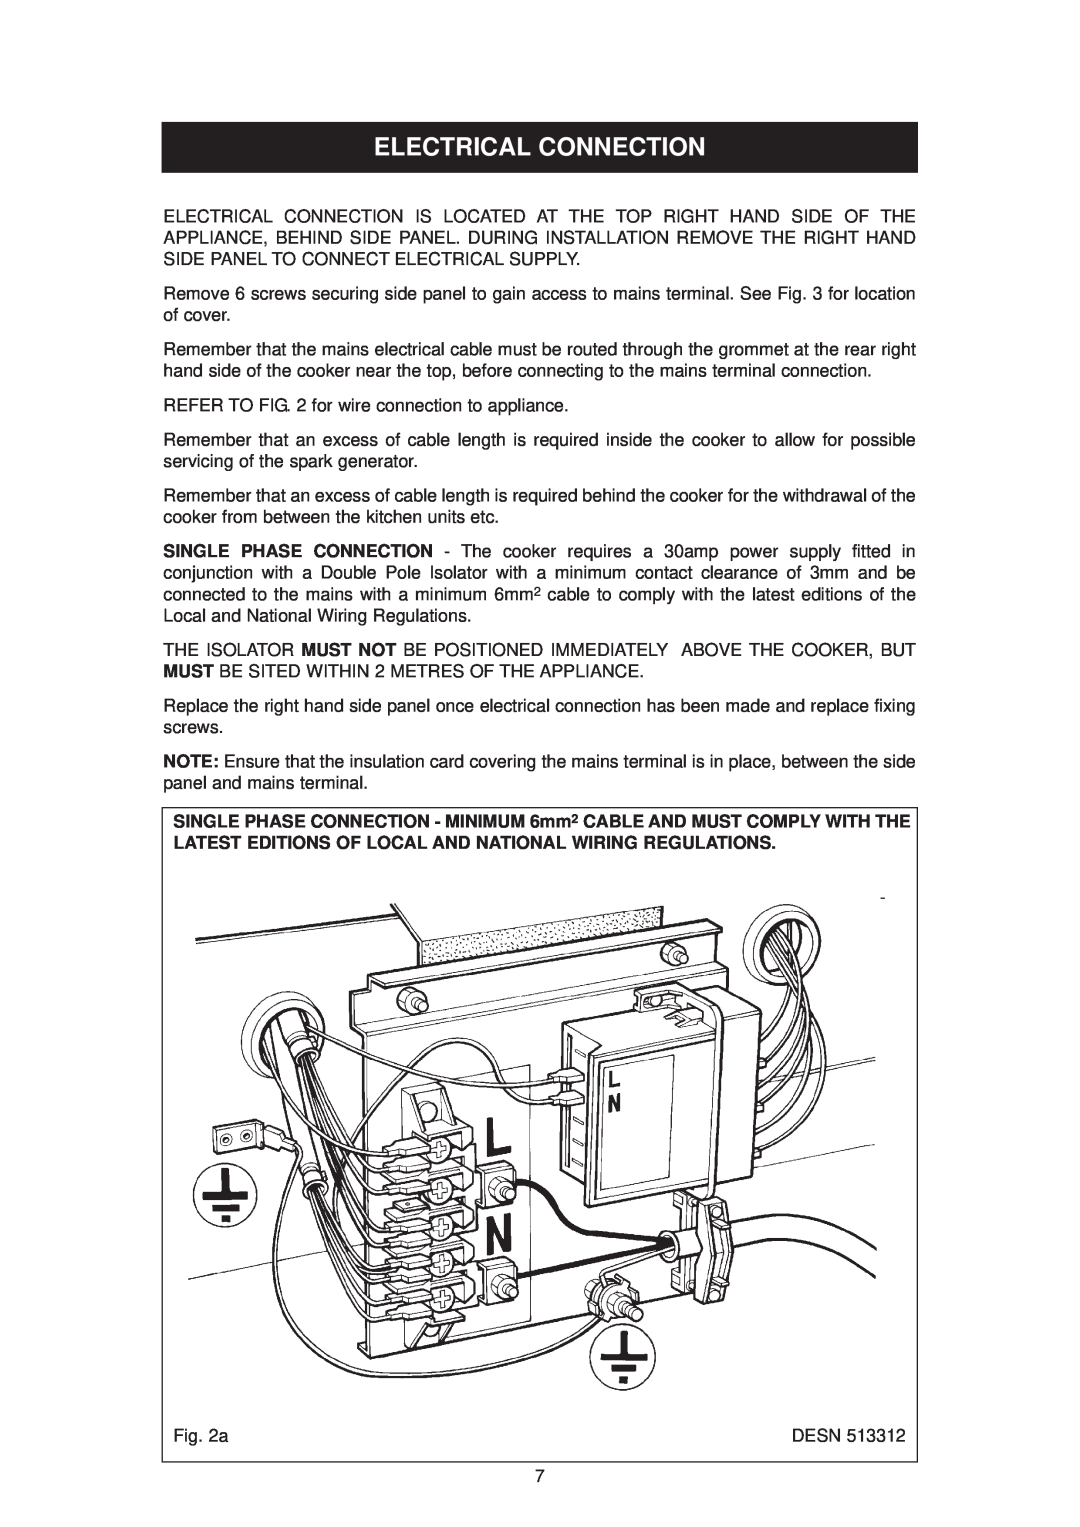 Aga Ranges dc6 owner manual Electrical Connection 